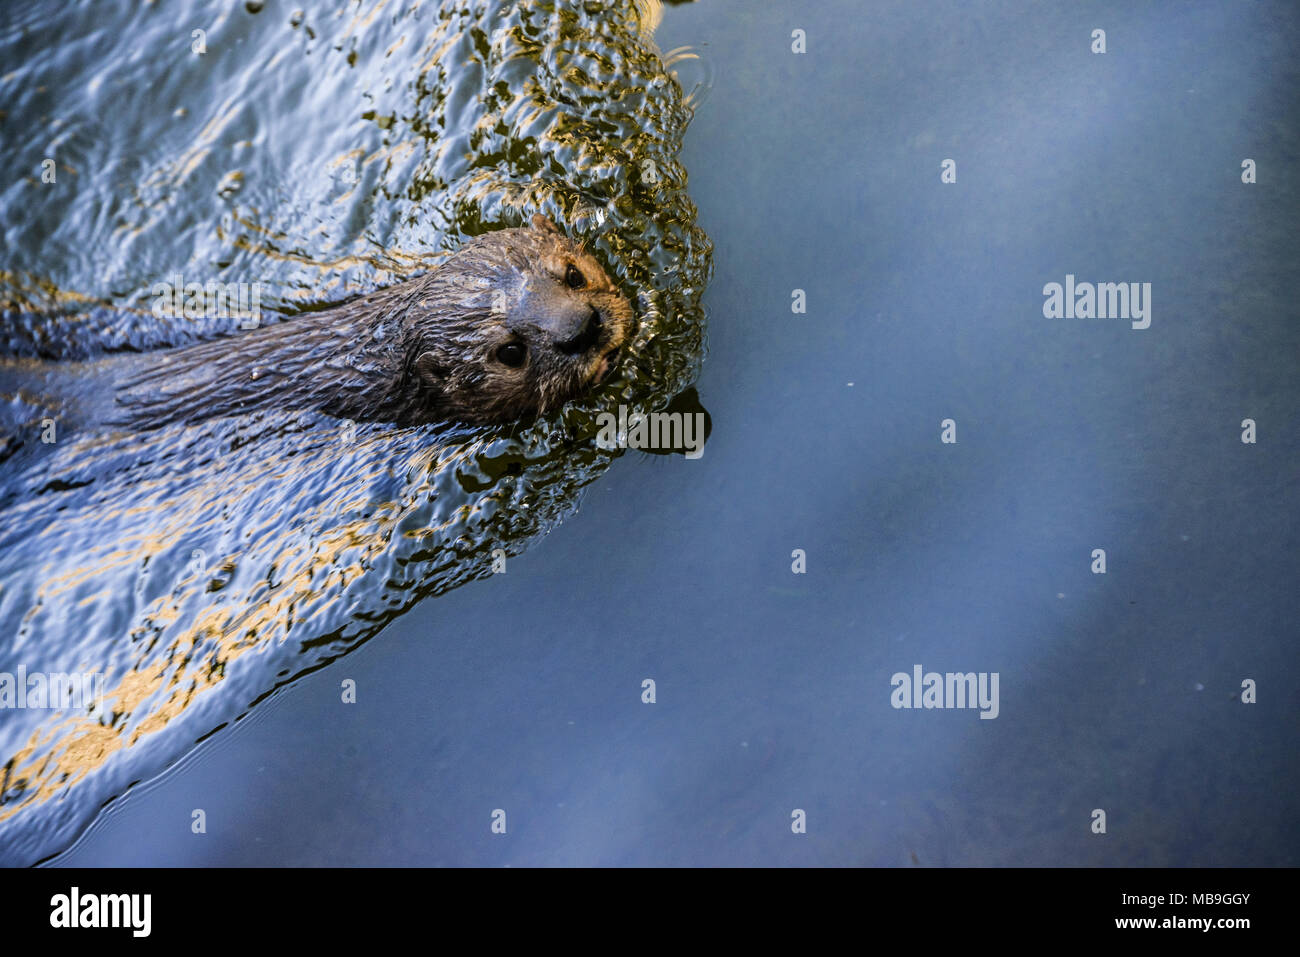 A spotted-necked otter (Hydrictis maculicollis) in Cango Wildlife Ranch, South Africa Stock Photo